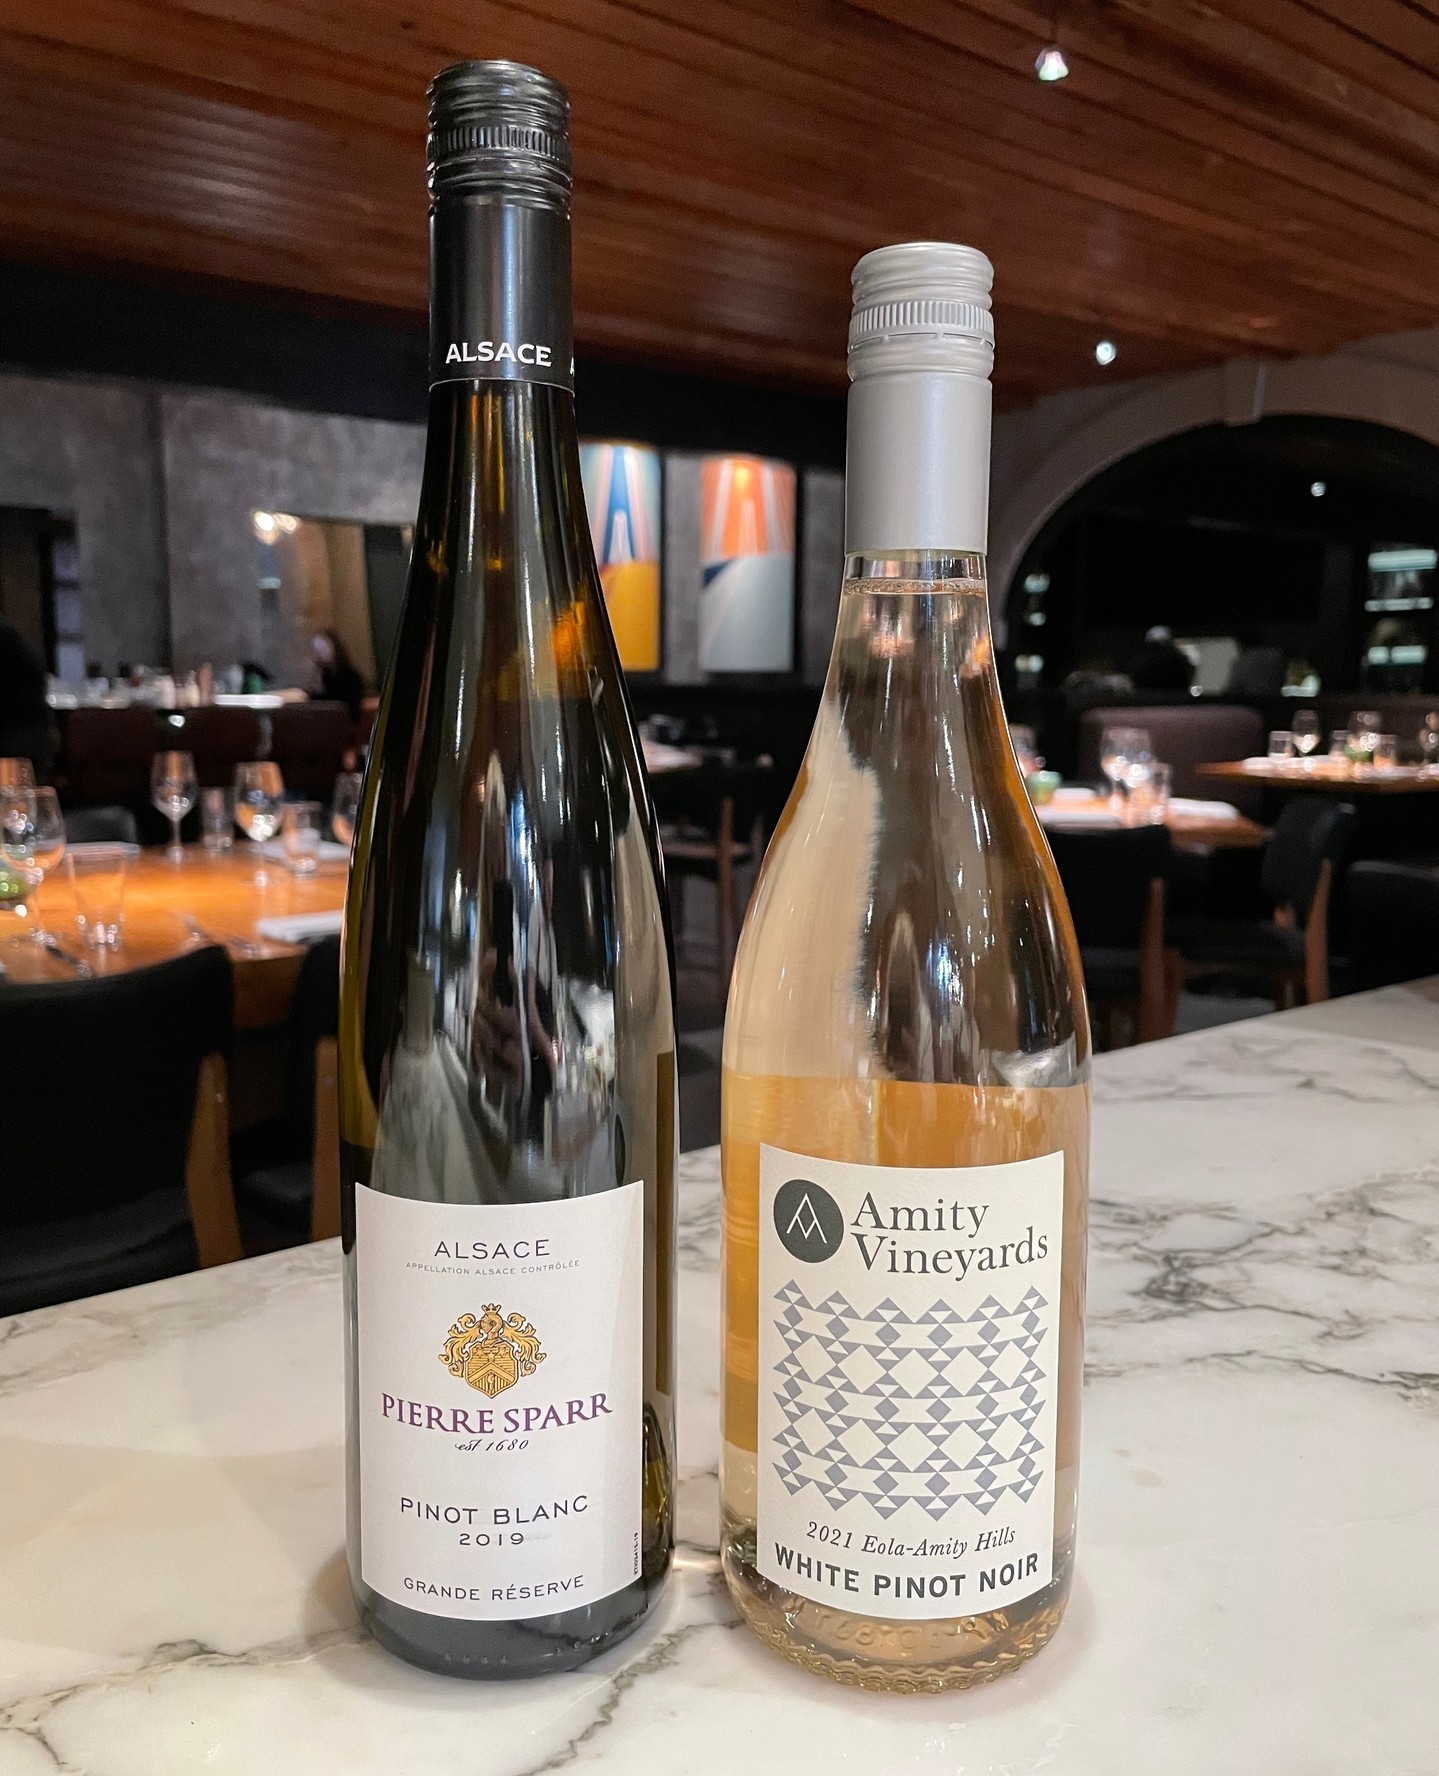 We've got quite a few new wines by the glass starting tonight! We'll pair your personal tastes to the perfect glass! ⁠
⁠
Full menu at EstablishmentCHS.com/wine